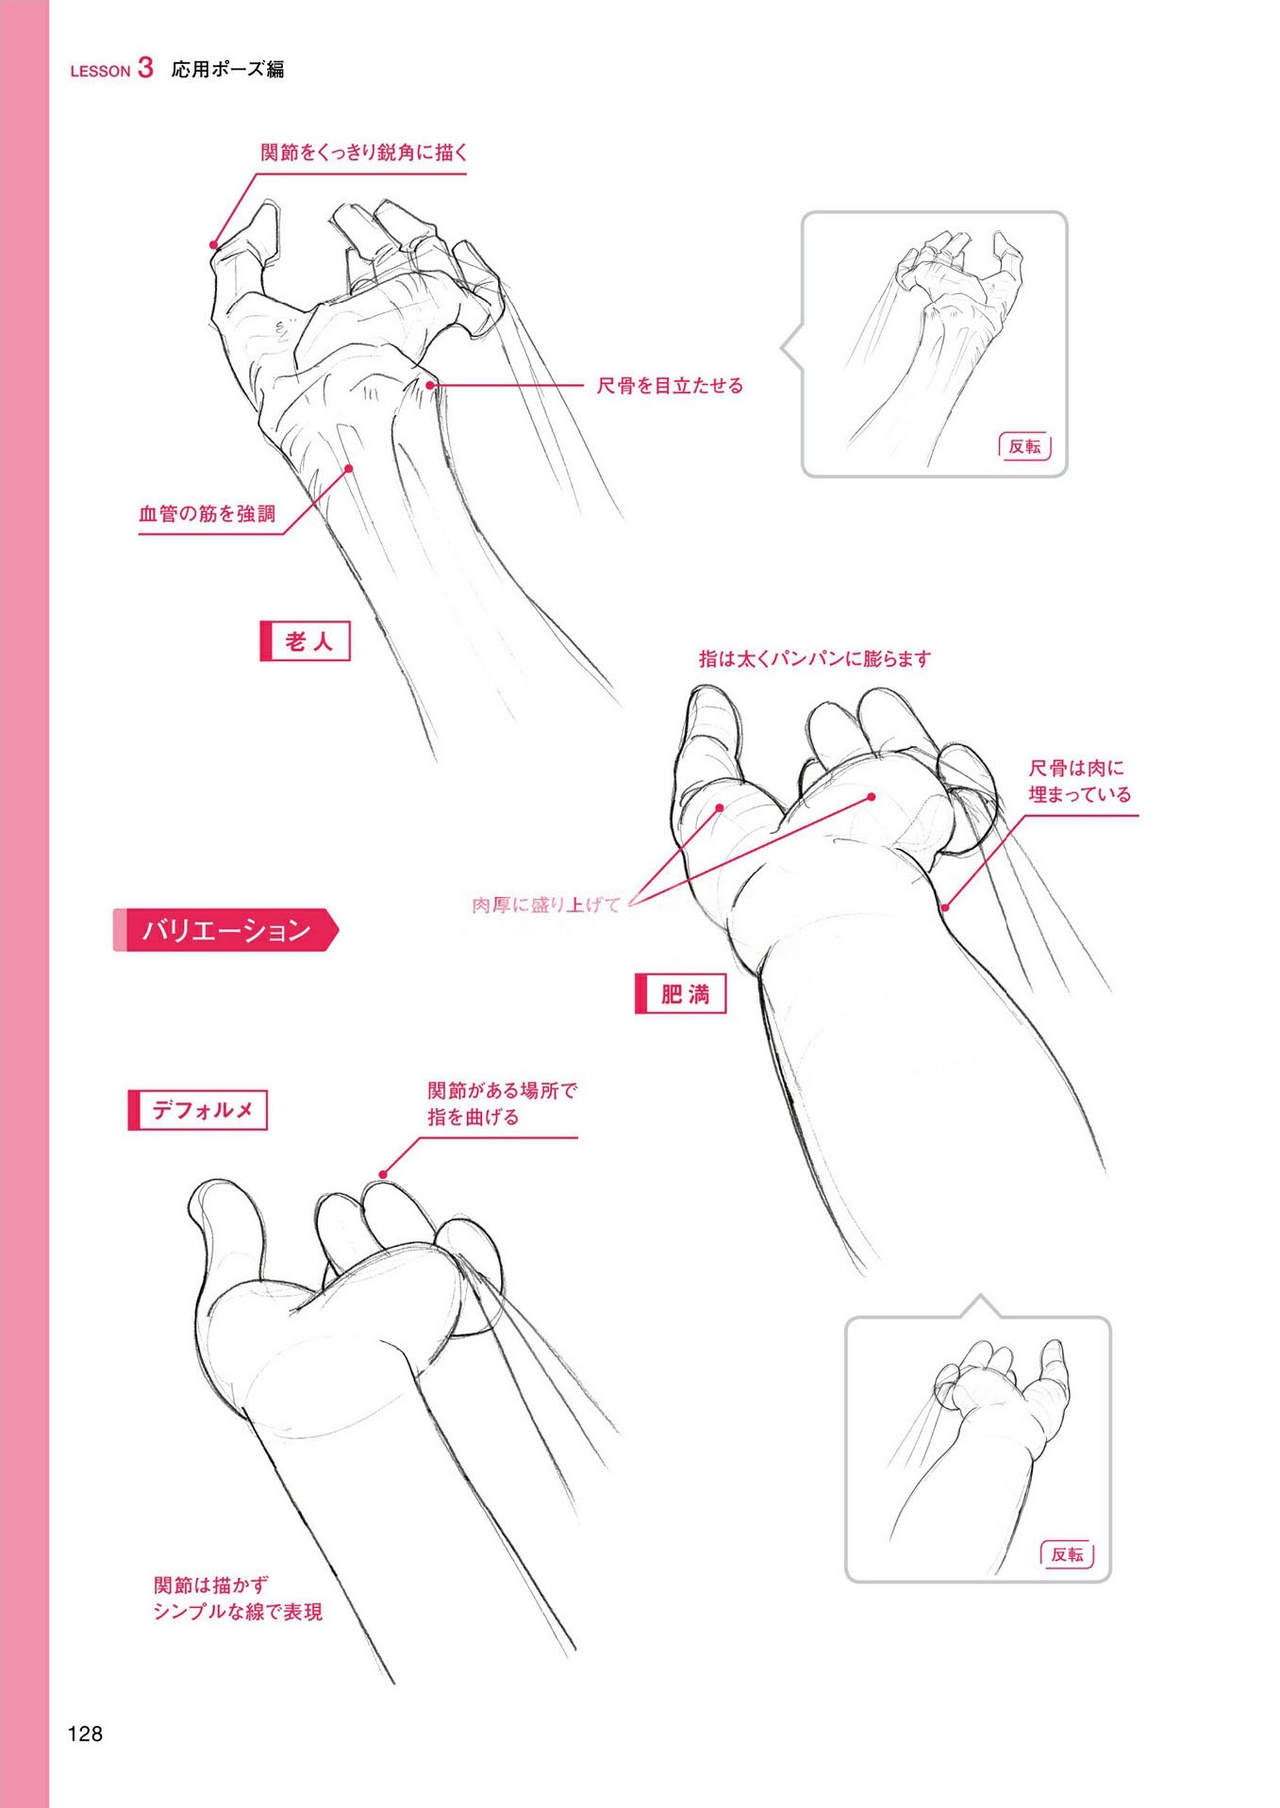 How to draw hands 128